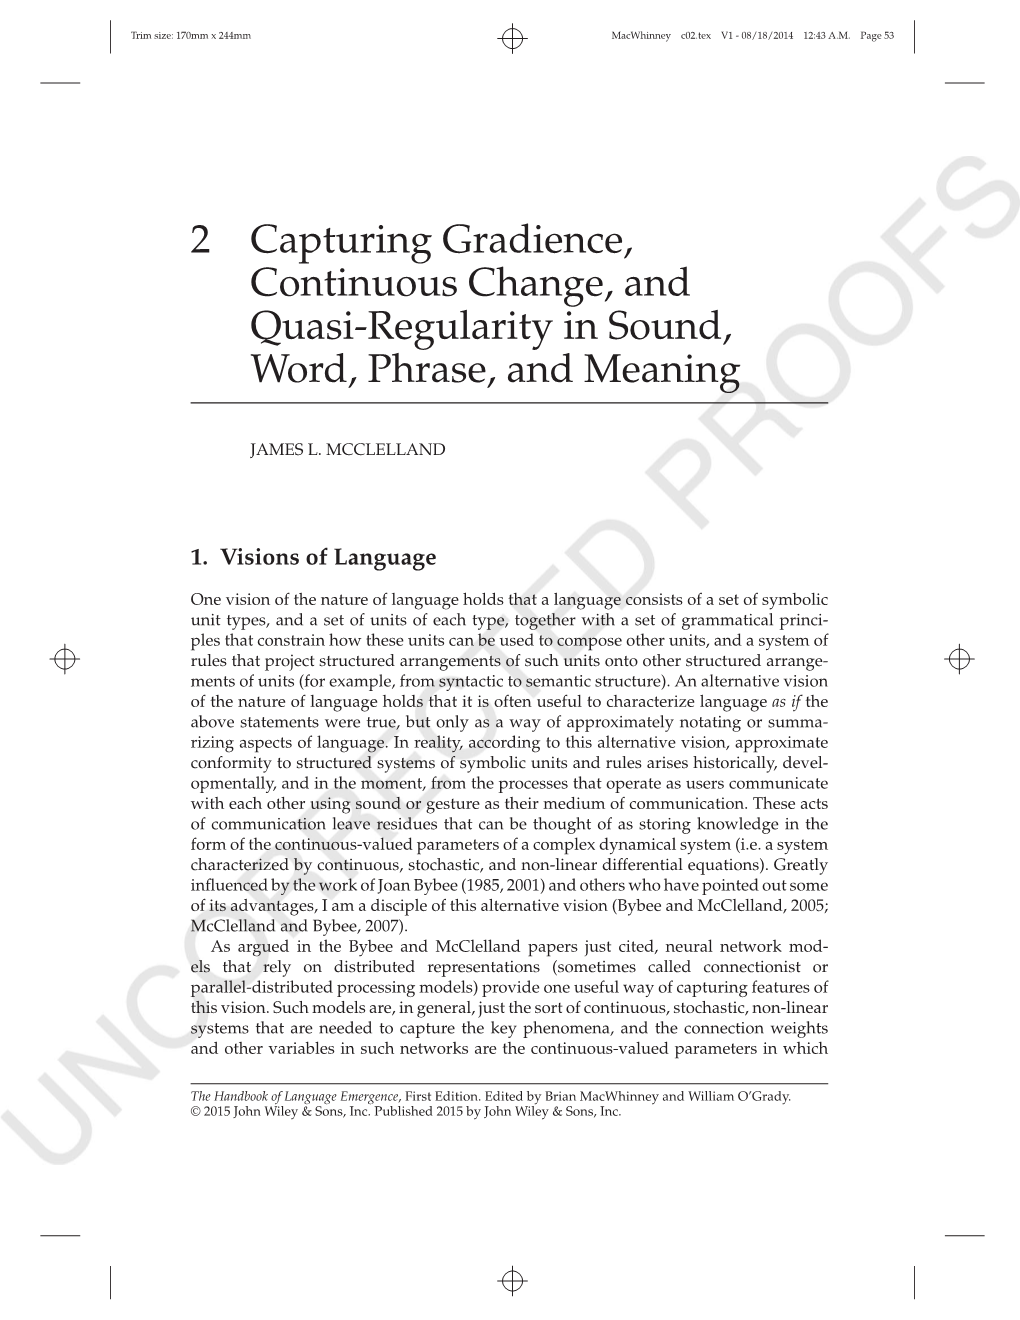 2 Capturing Gradience, Continuous Change, and Quasi-Regularity in Sound, Word, Phrase, and Meaning